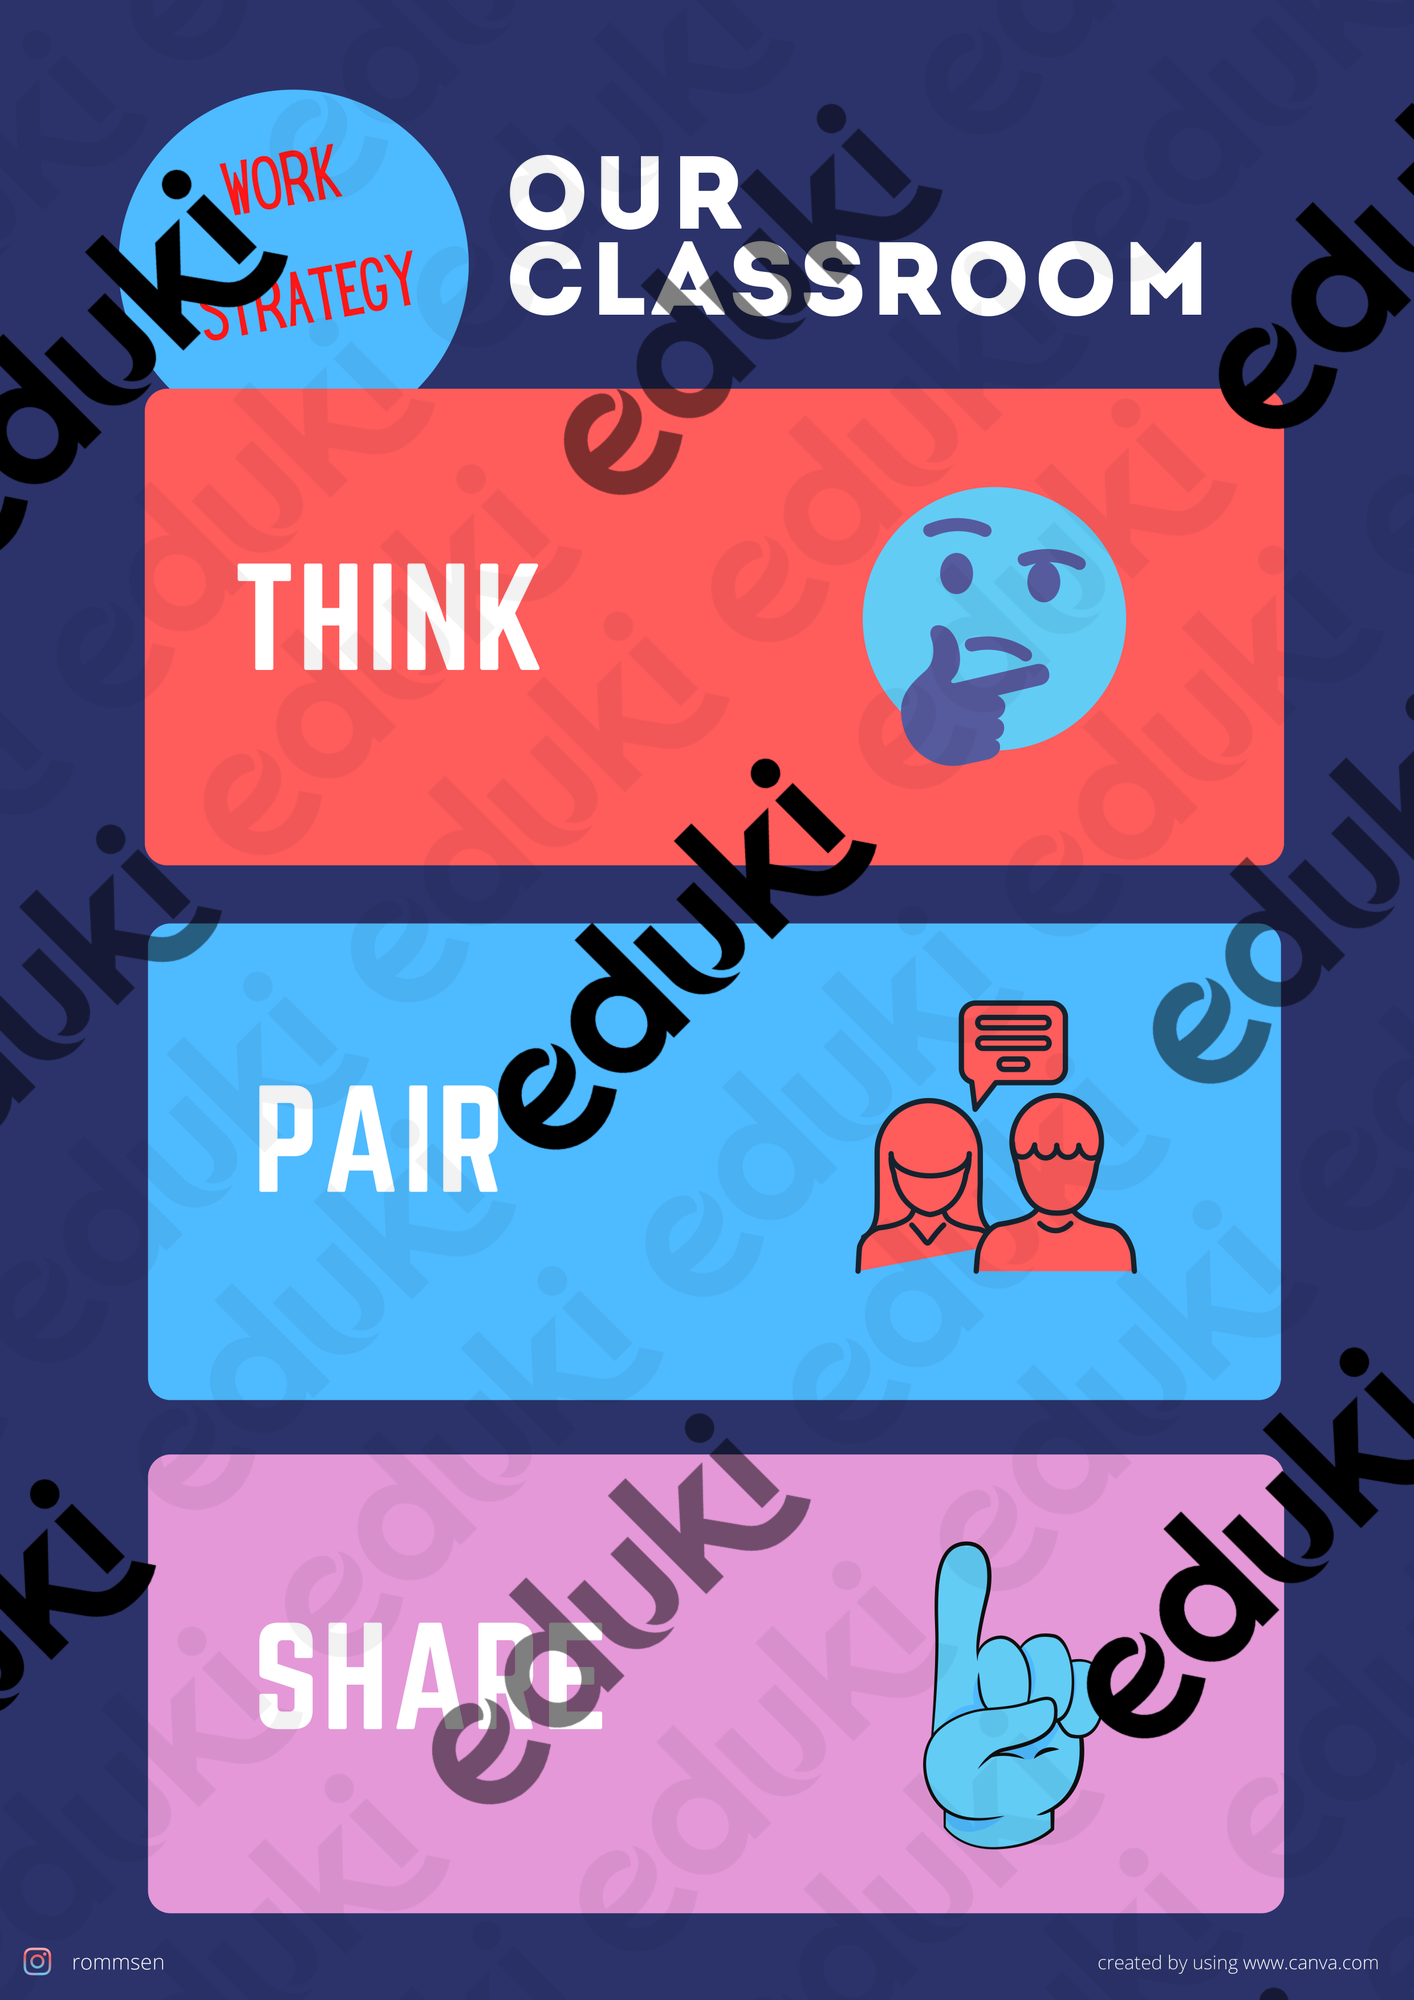 think pair share poster